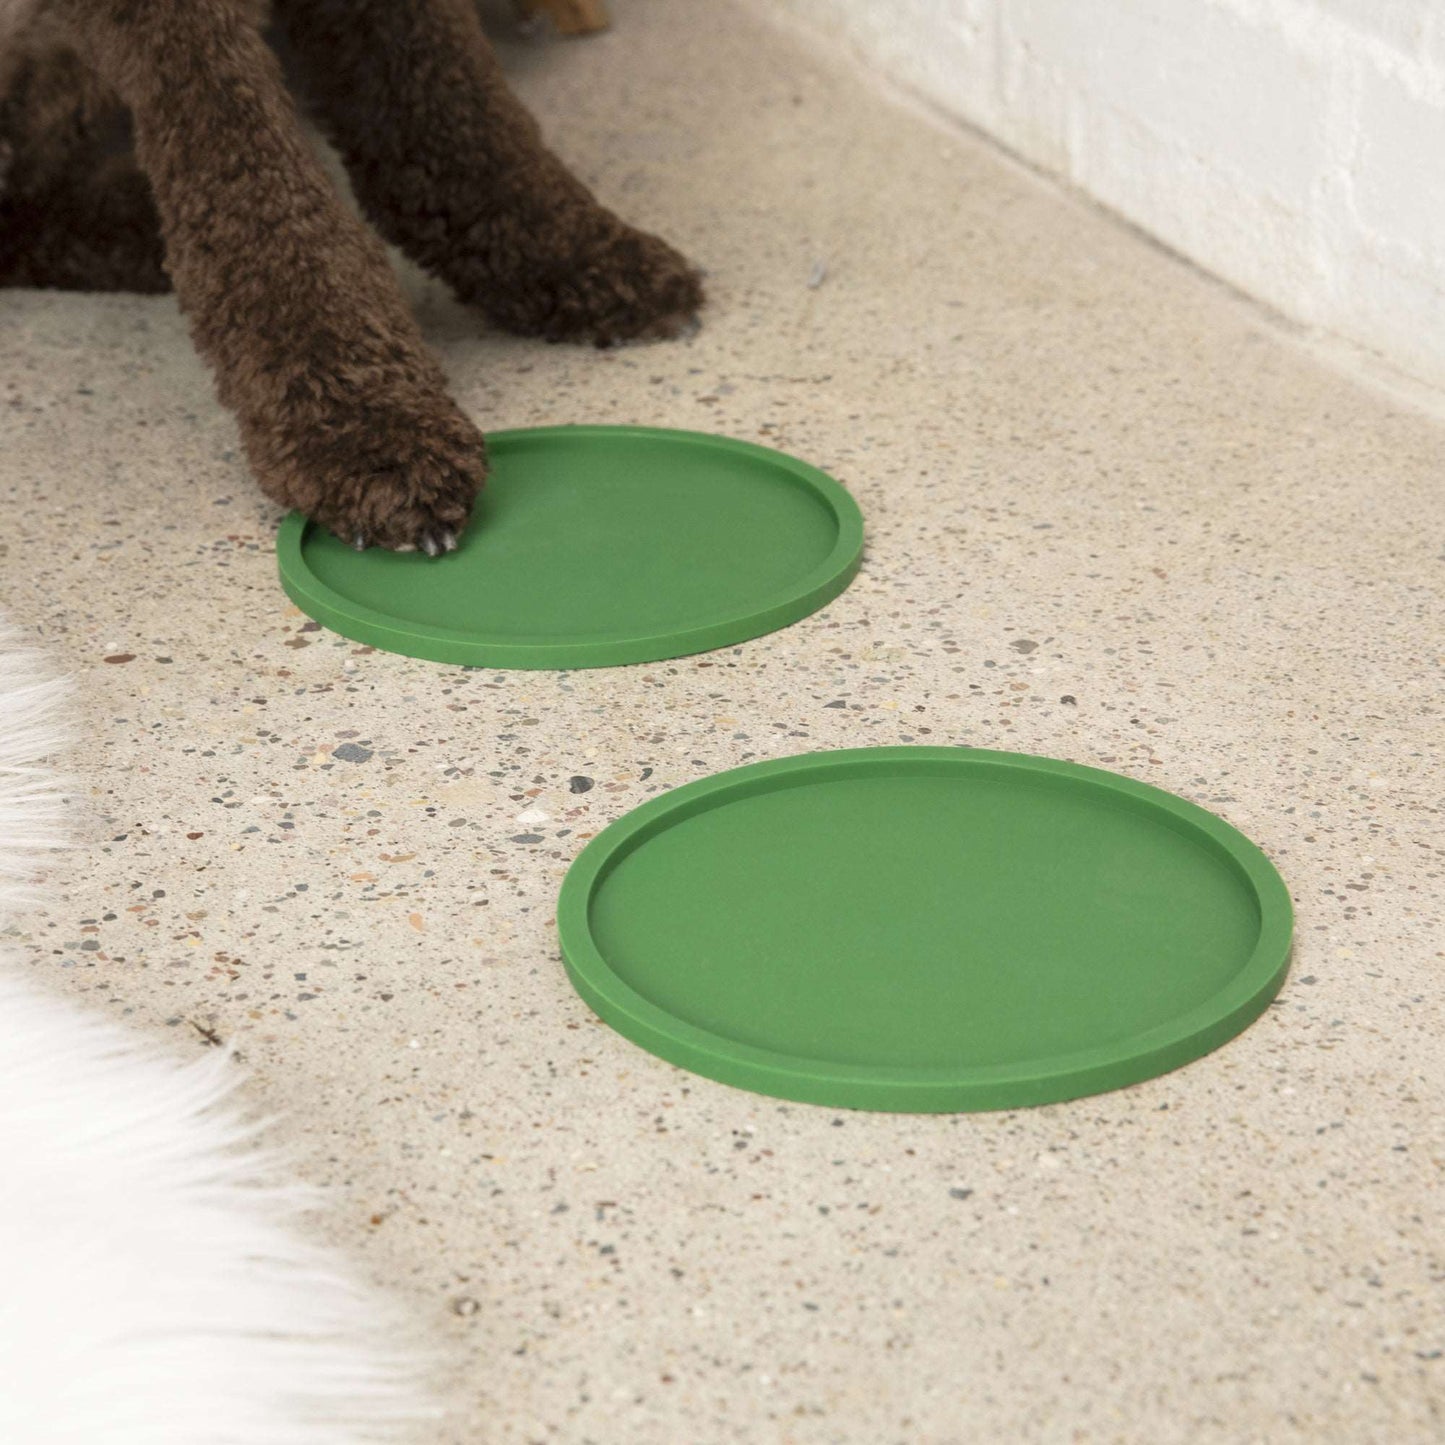 Habit Circle Non-slip Silicon Dog Bowl Placemat (Set of 2) by Waggo size reference